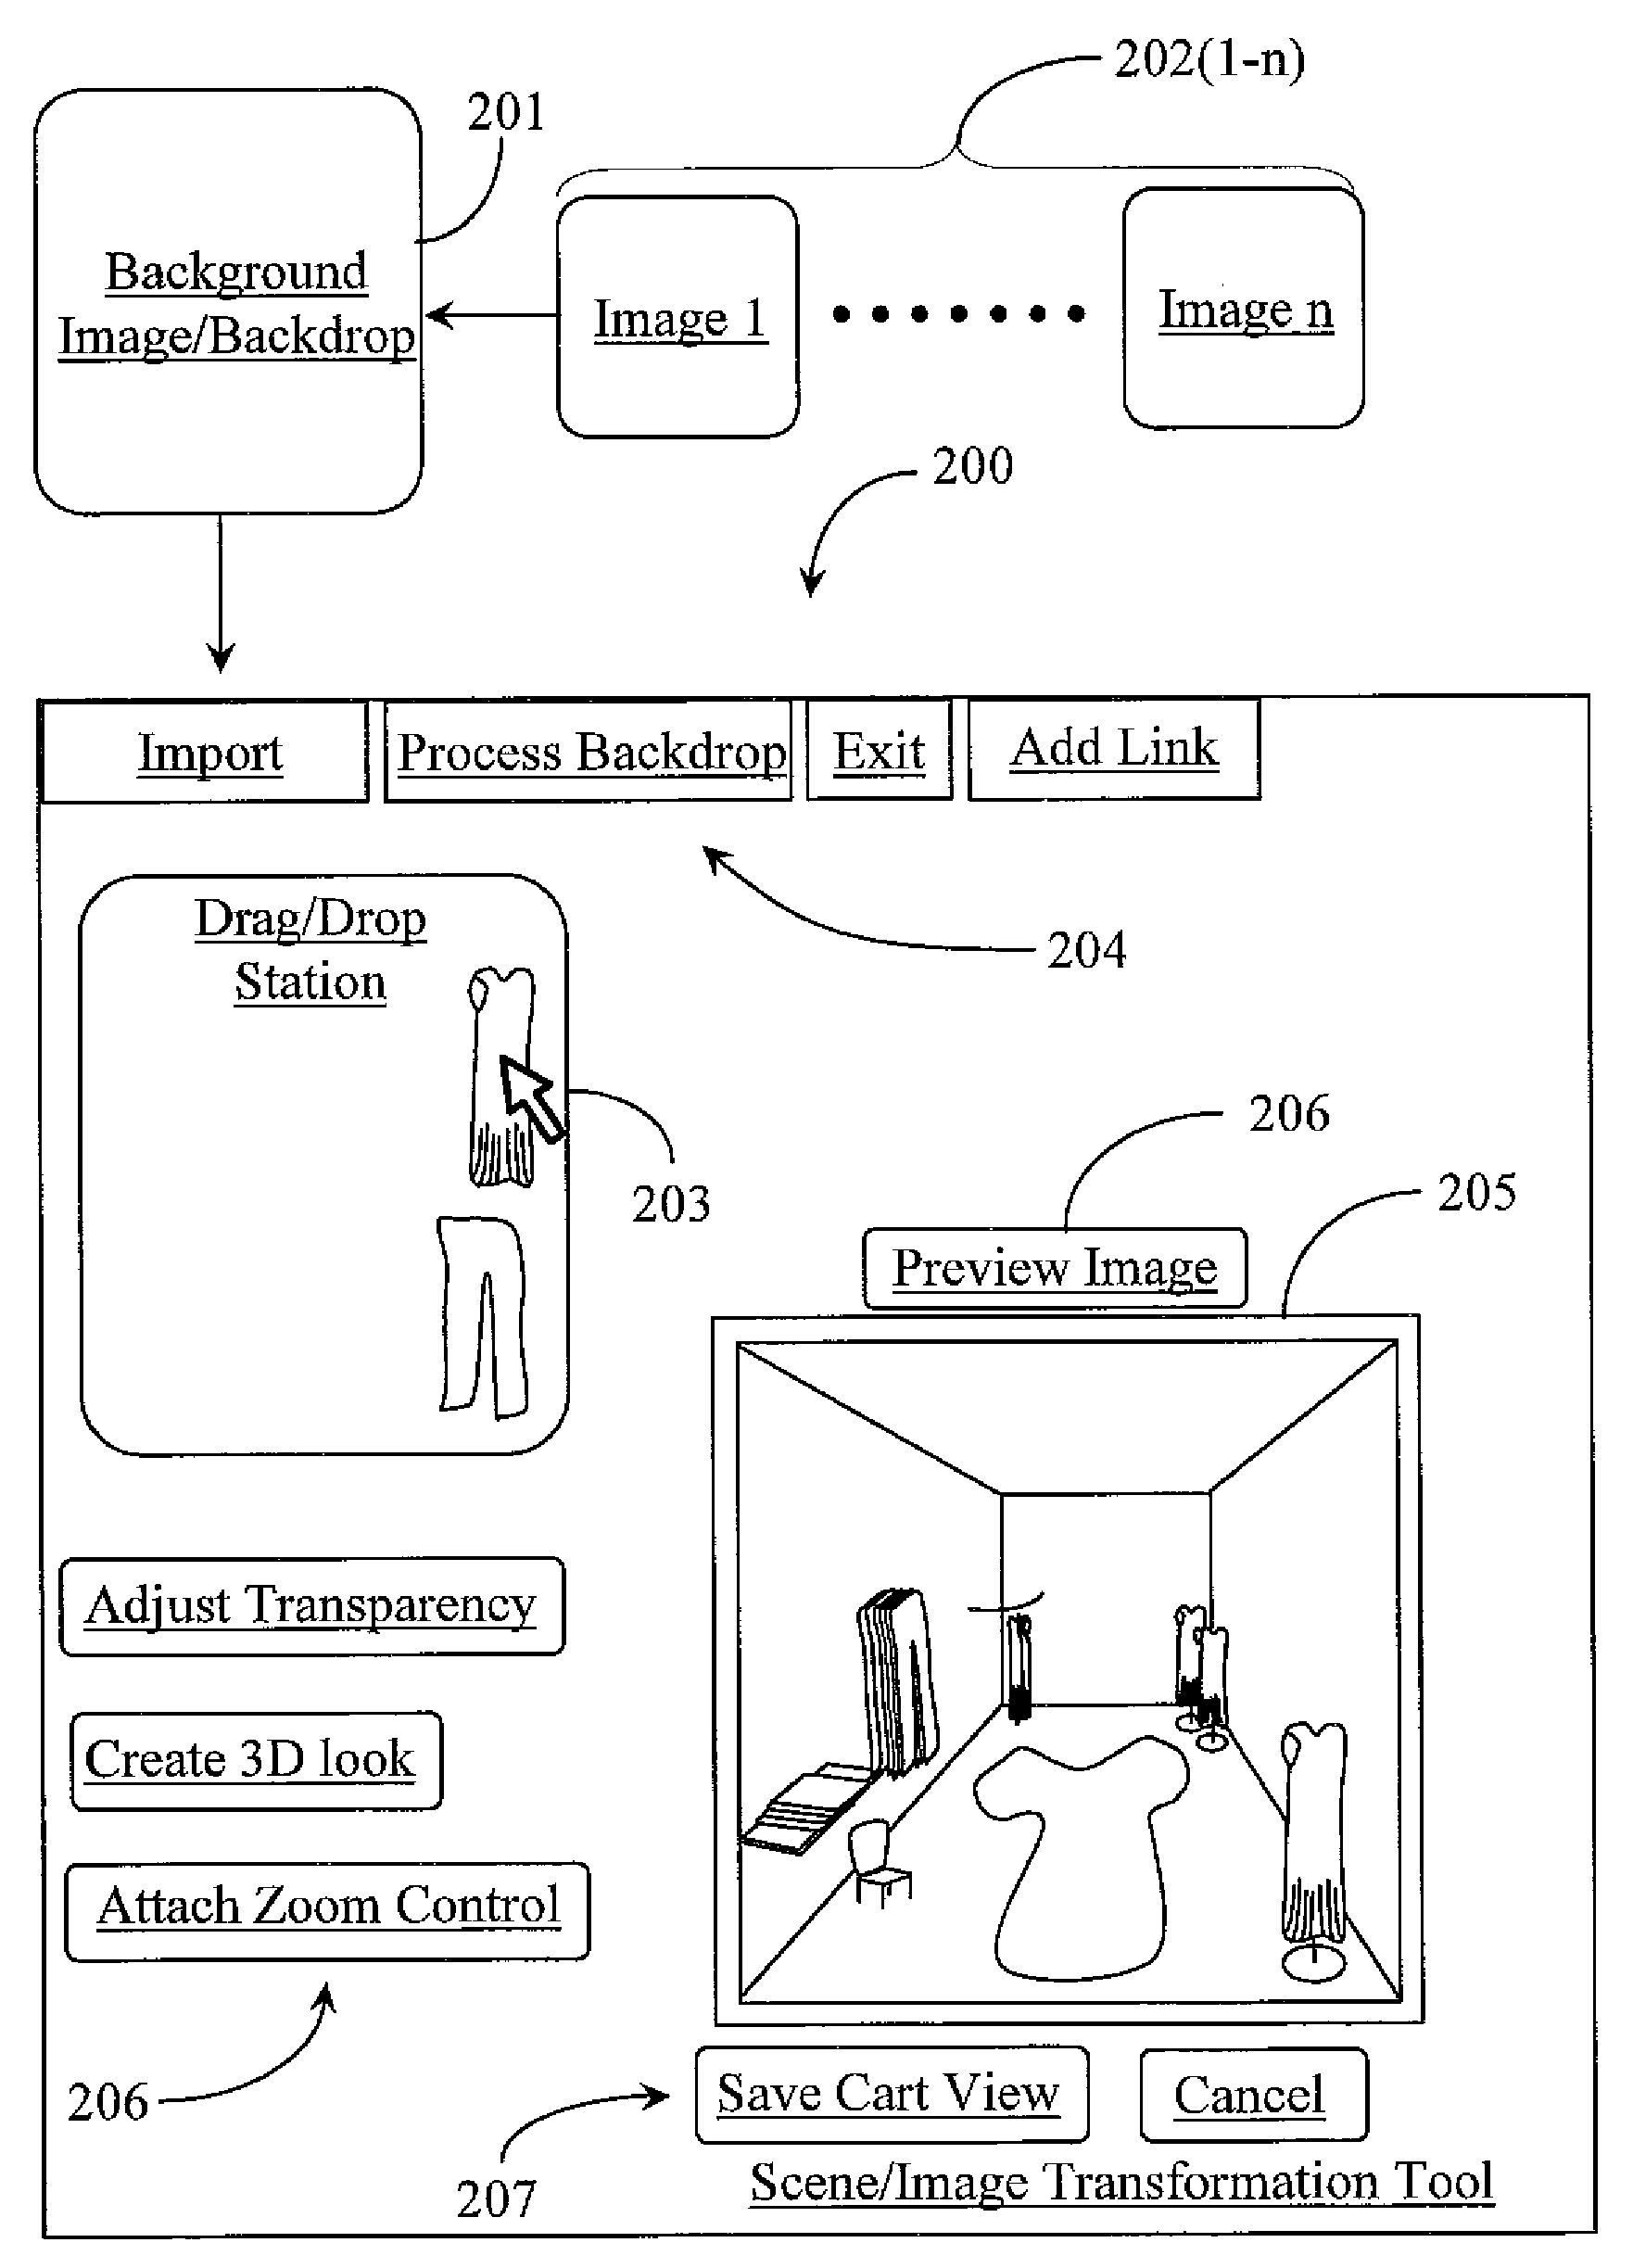 Method and System for Creating a Multifunctional Collage Useable for Client/Server Communication